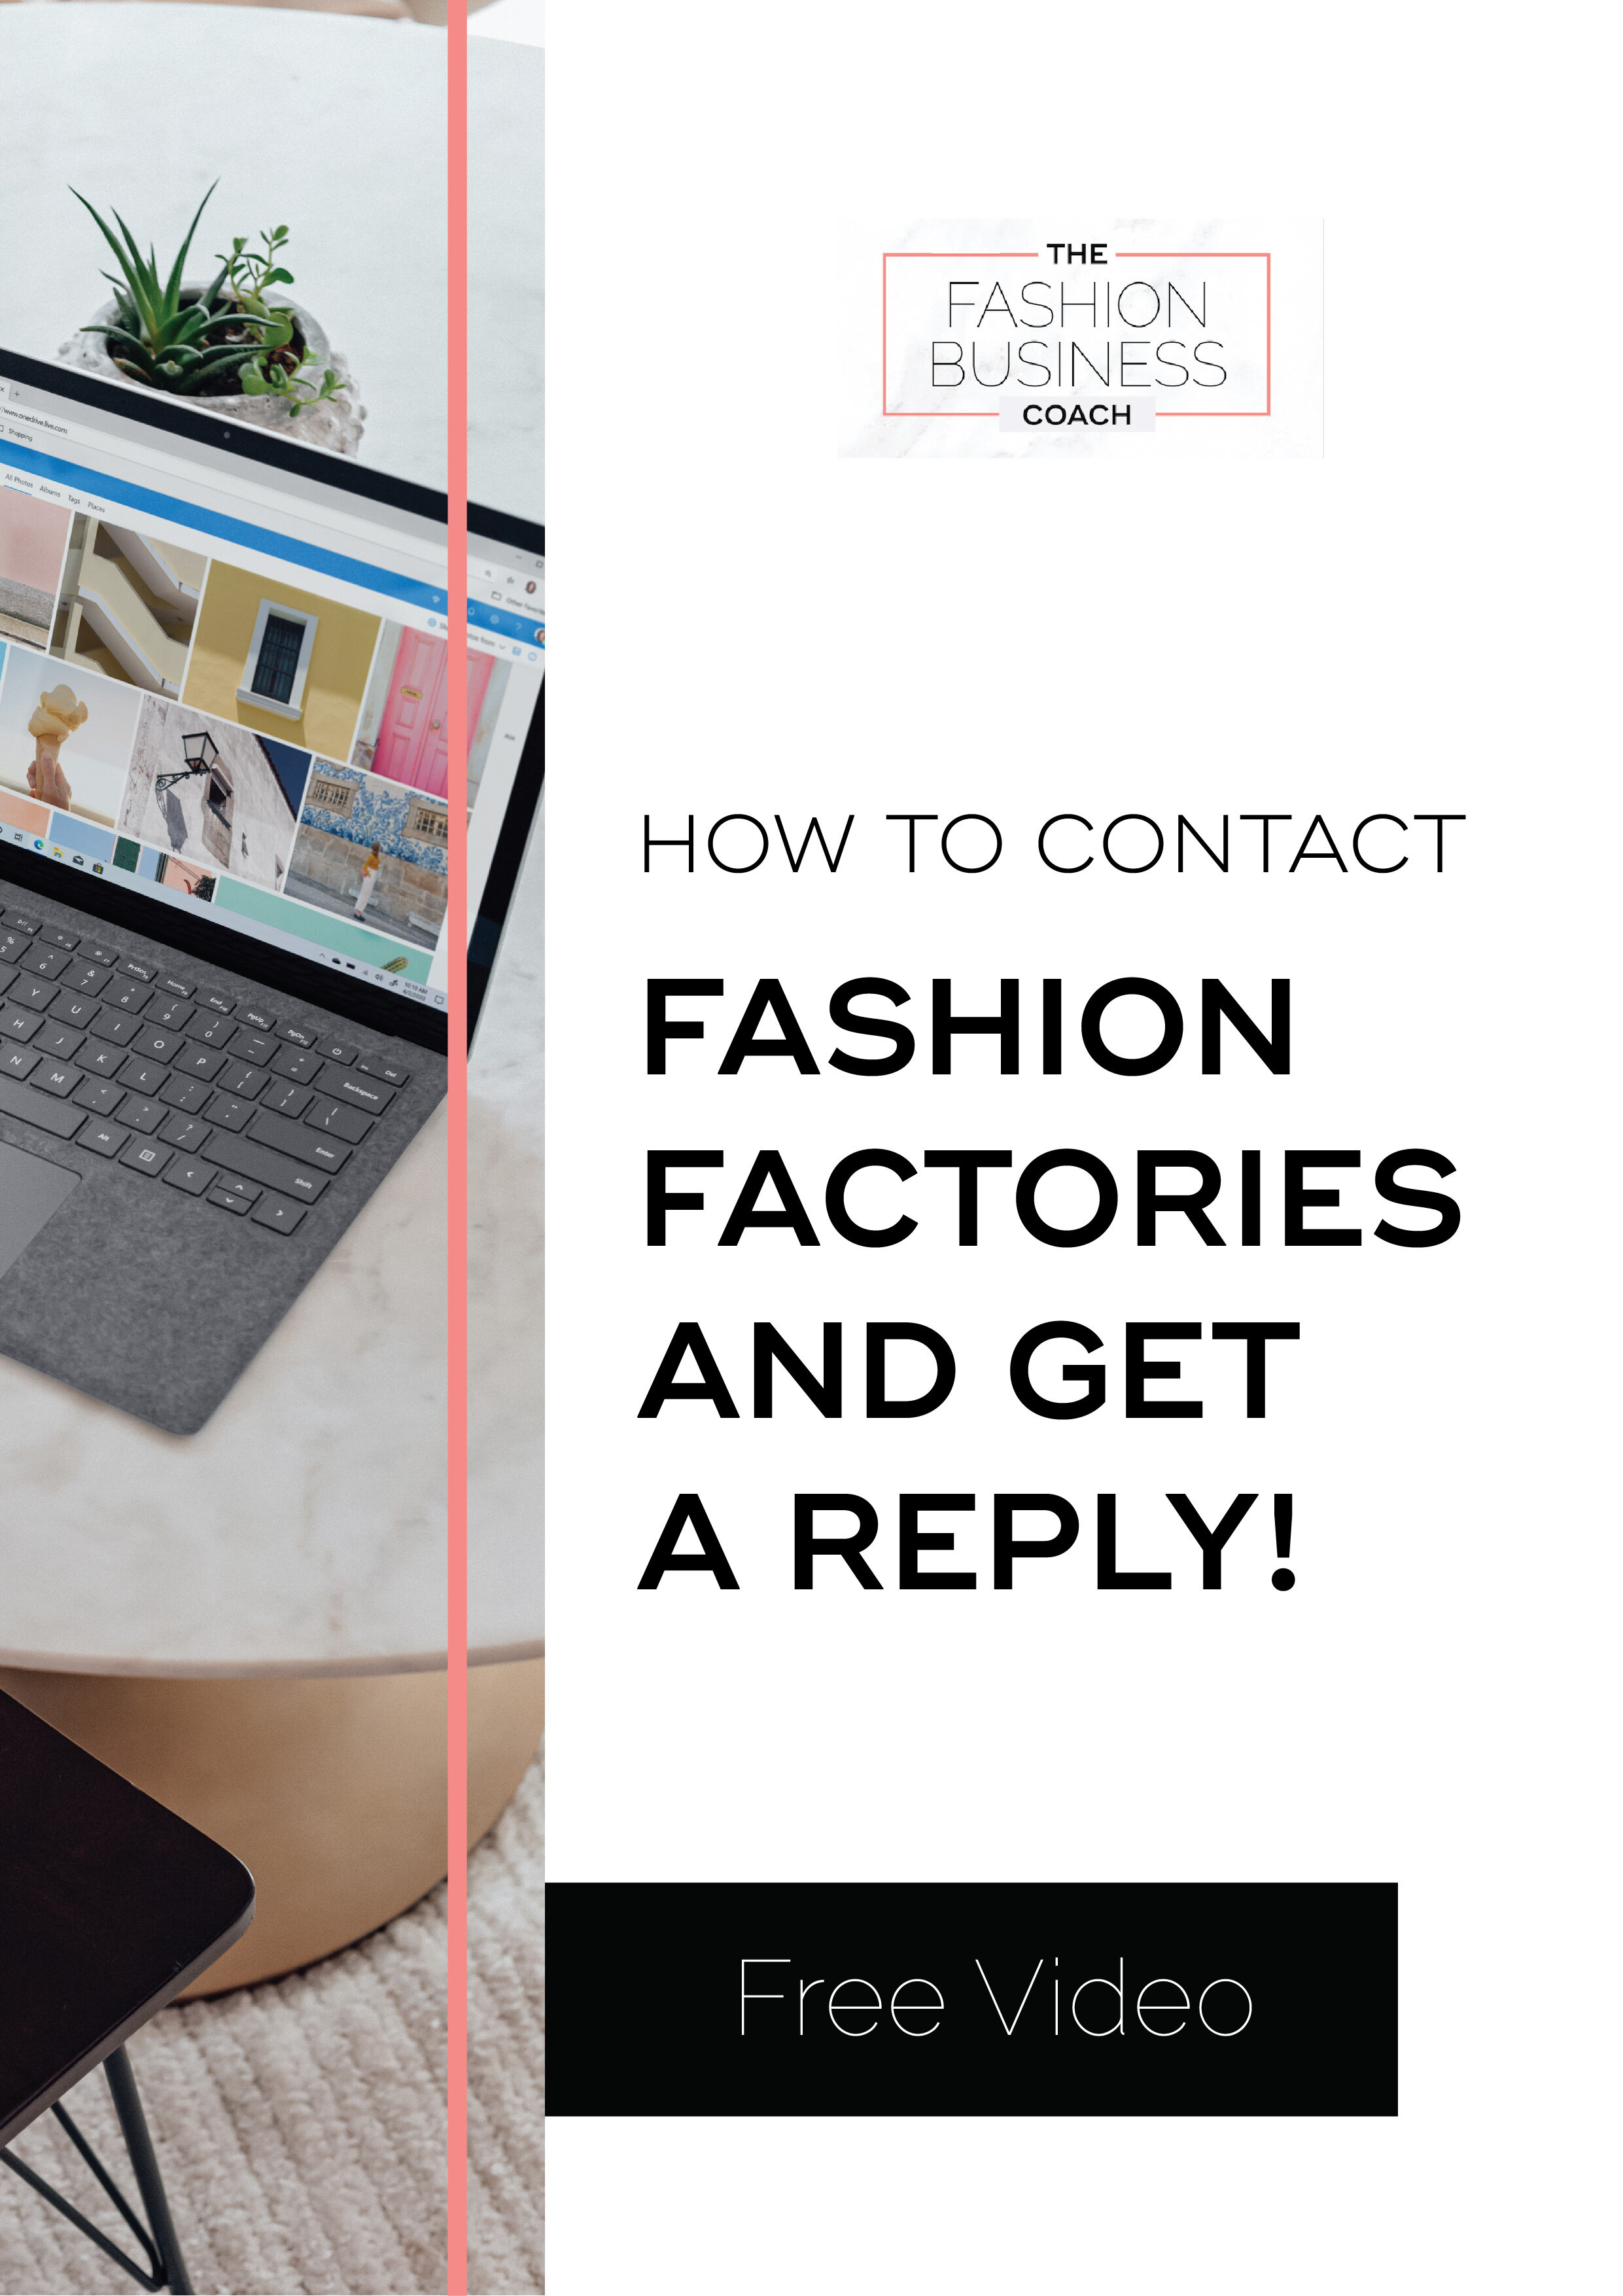 How to Contact Fashion Factories and Get a Reply Video.jpg